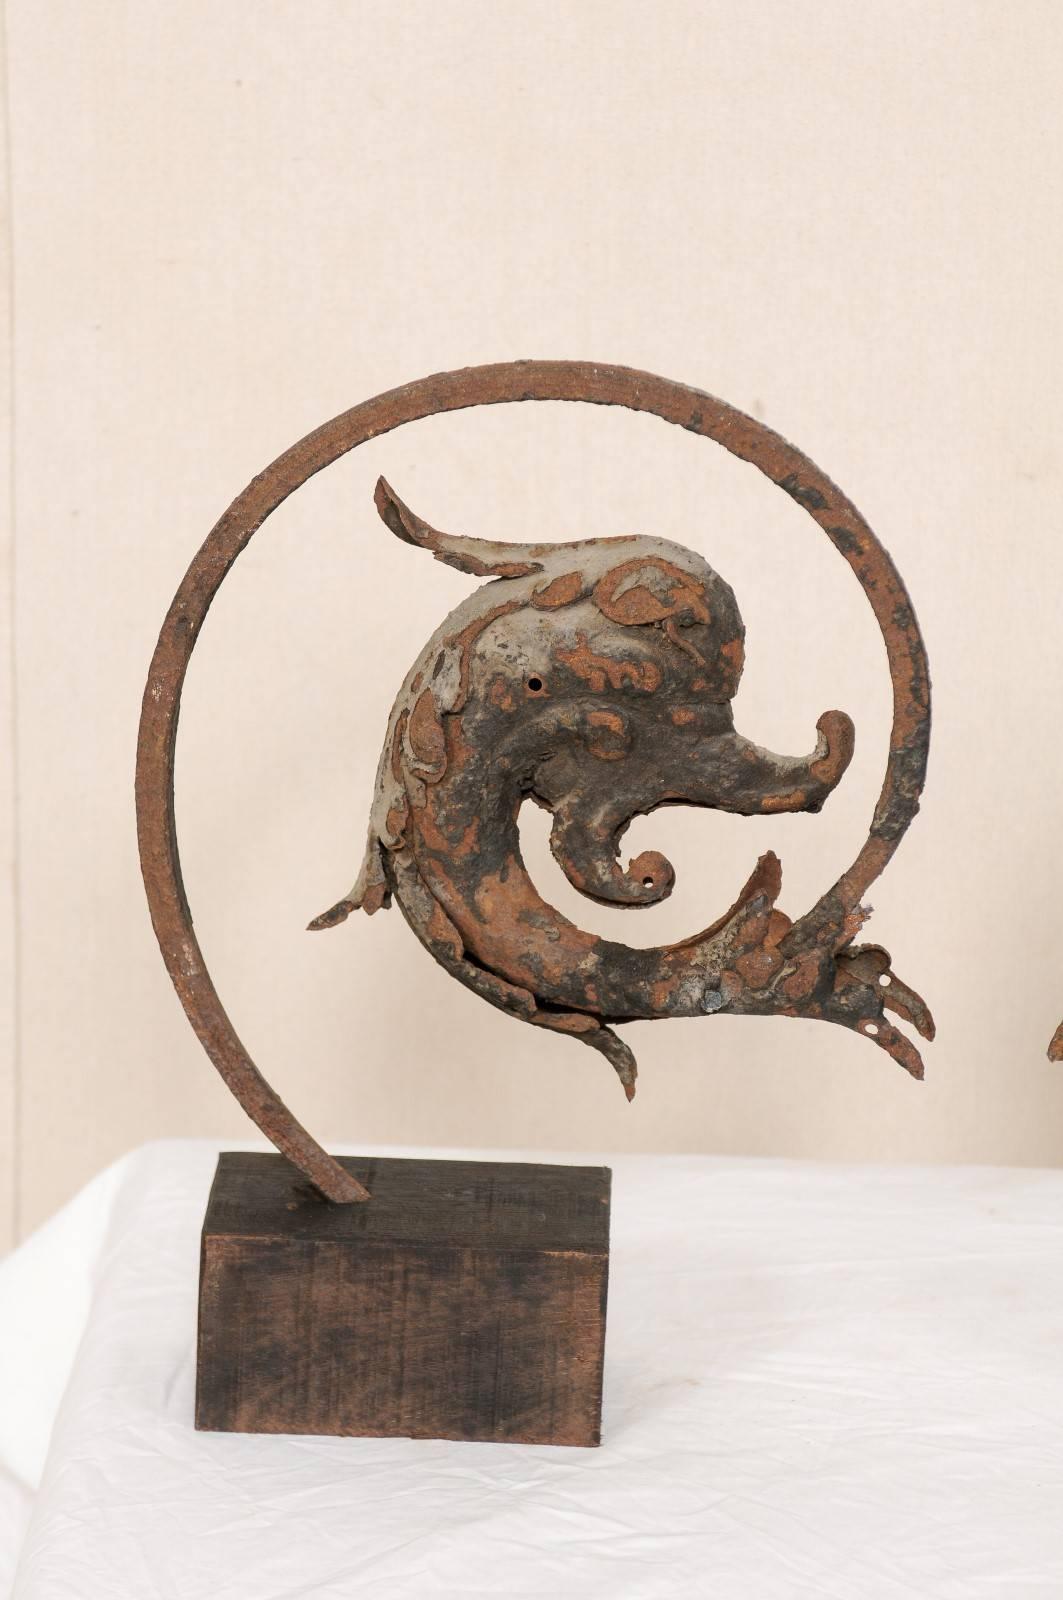 A pair of French, early 19th century mythological dolphin fish on stands. This is a pair of antique French architectural elements feature the heads of mythological dolphins which have been displayed on custom stands. The dolphins are iron with